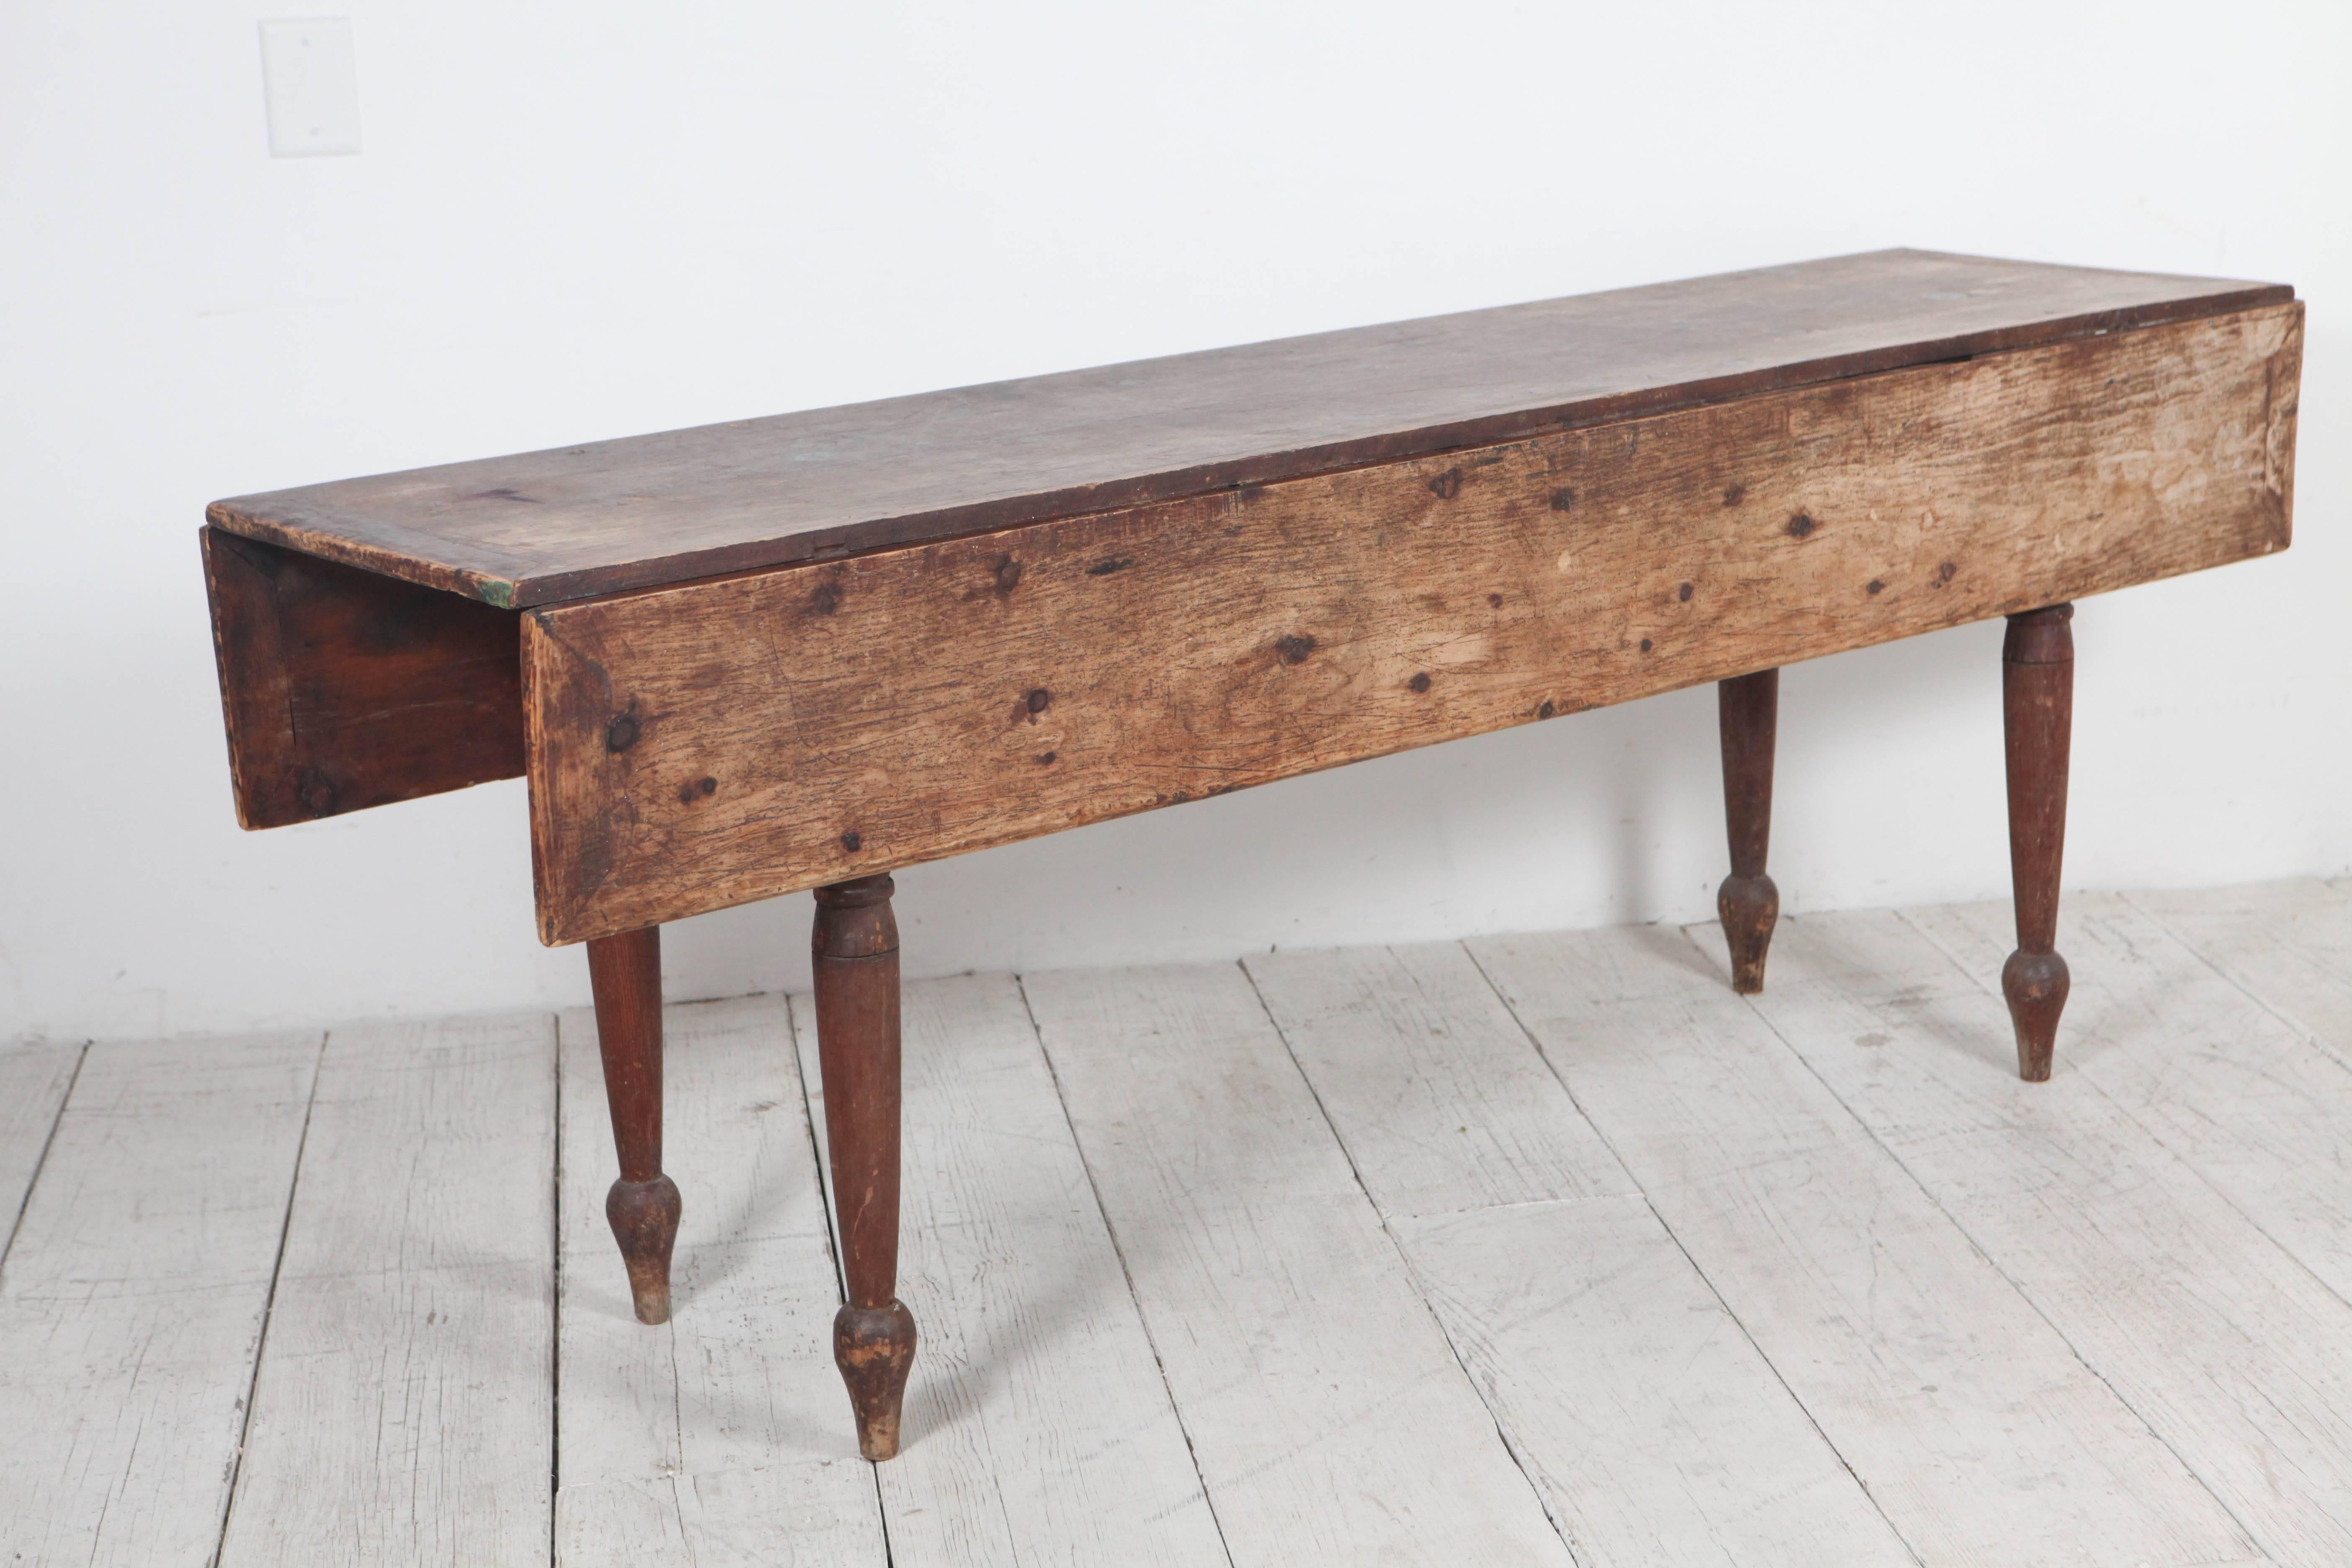 Mid-20th Century Rustic Drop-Leaf Wooden Table with Turned Legs